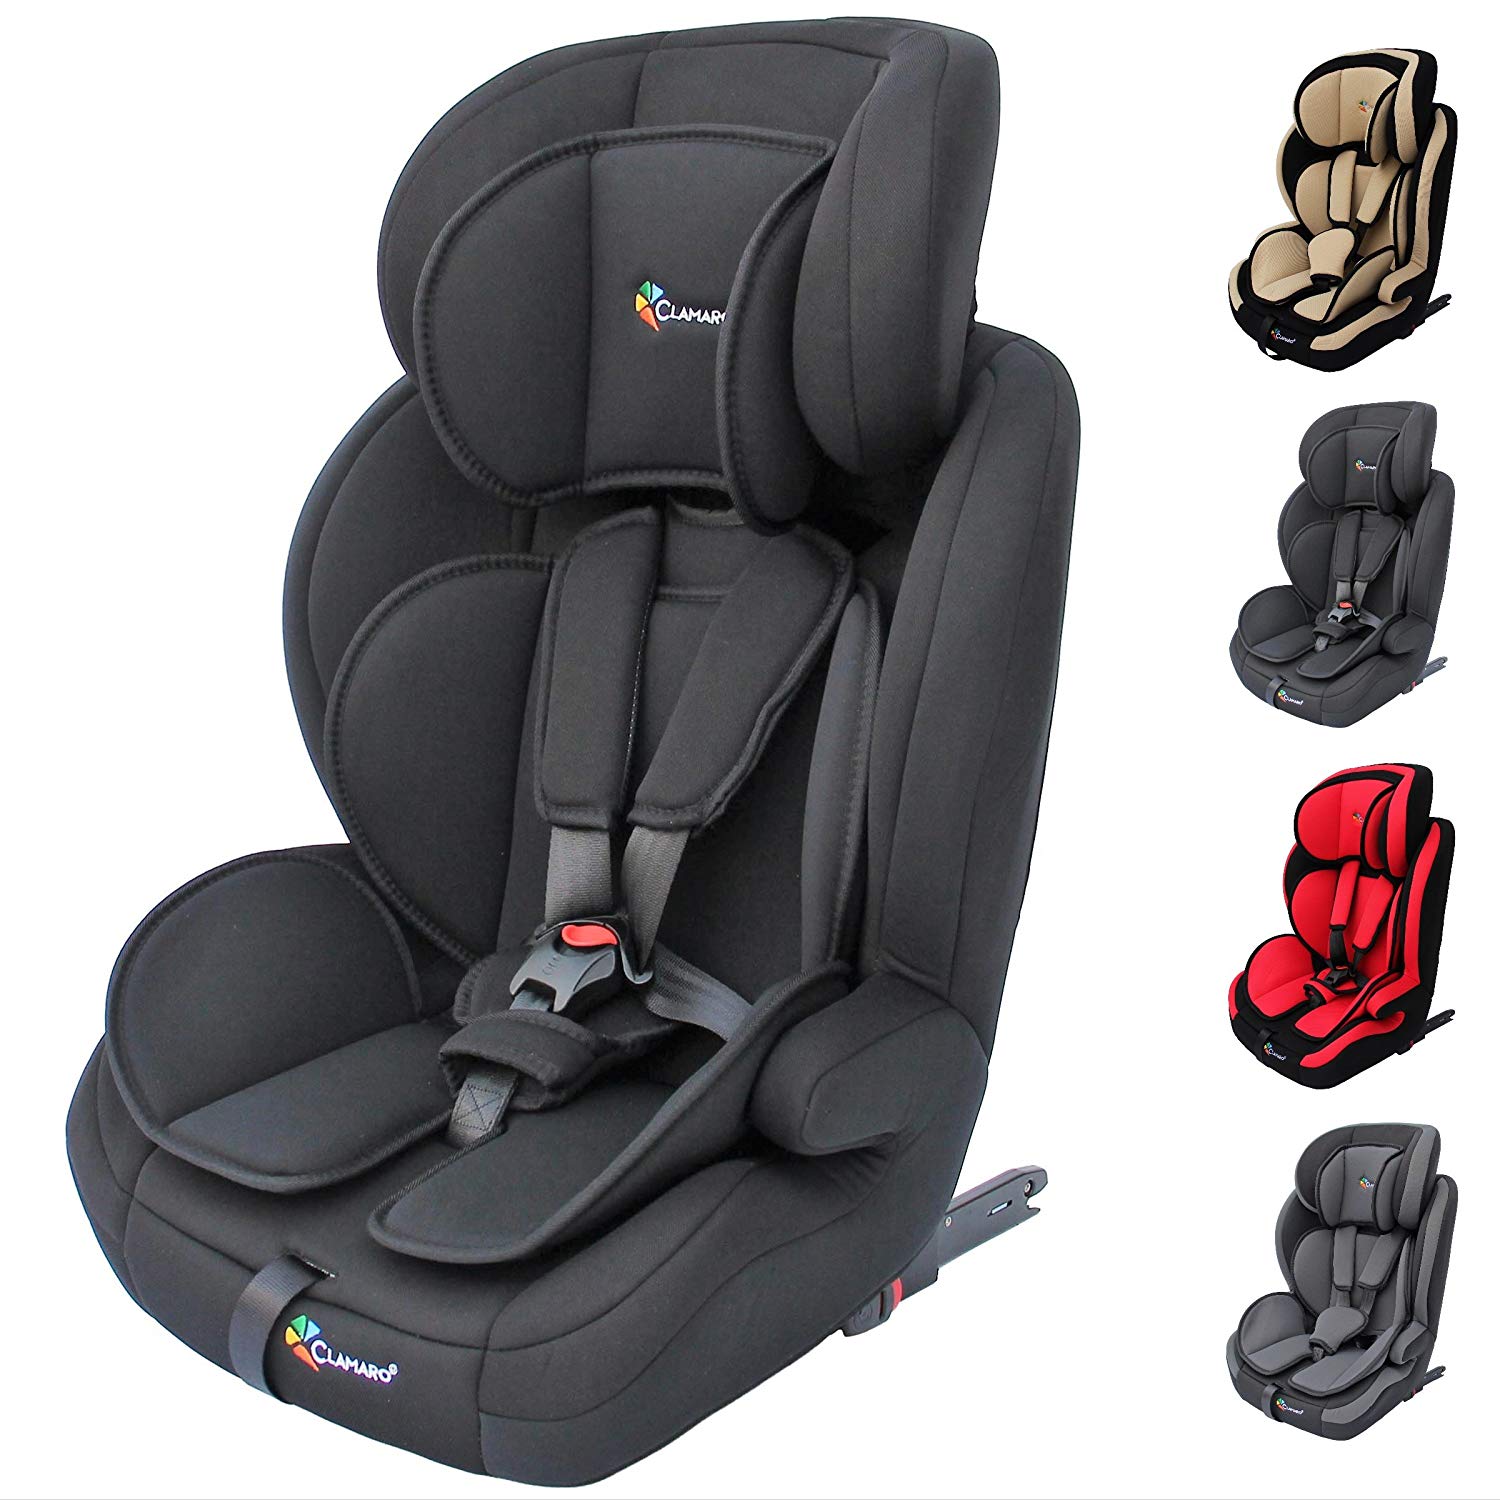 Clamaro Guardian Isofix Child Car Seat 9-36 kg ISOFIX Grows with the Child, Child Car Seat for Children from 1-12 Years (Group 1I, II, III), Isofix and Top Tether, ECE R44/04 Approval - Beige Black